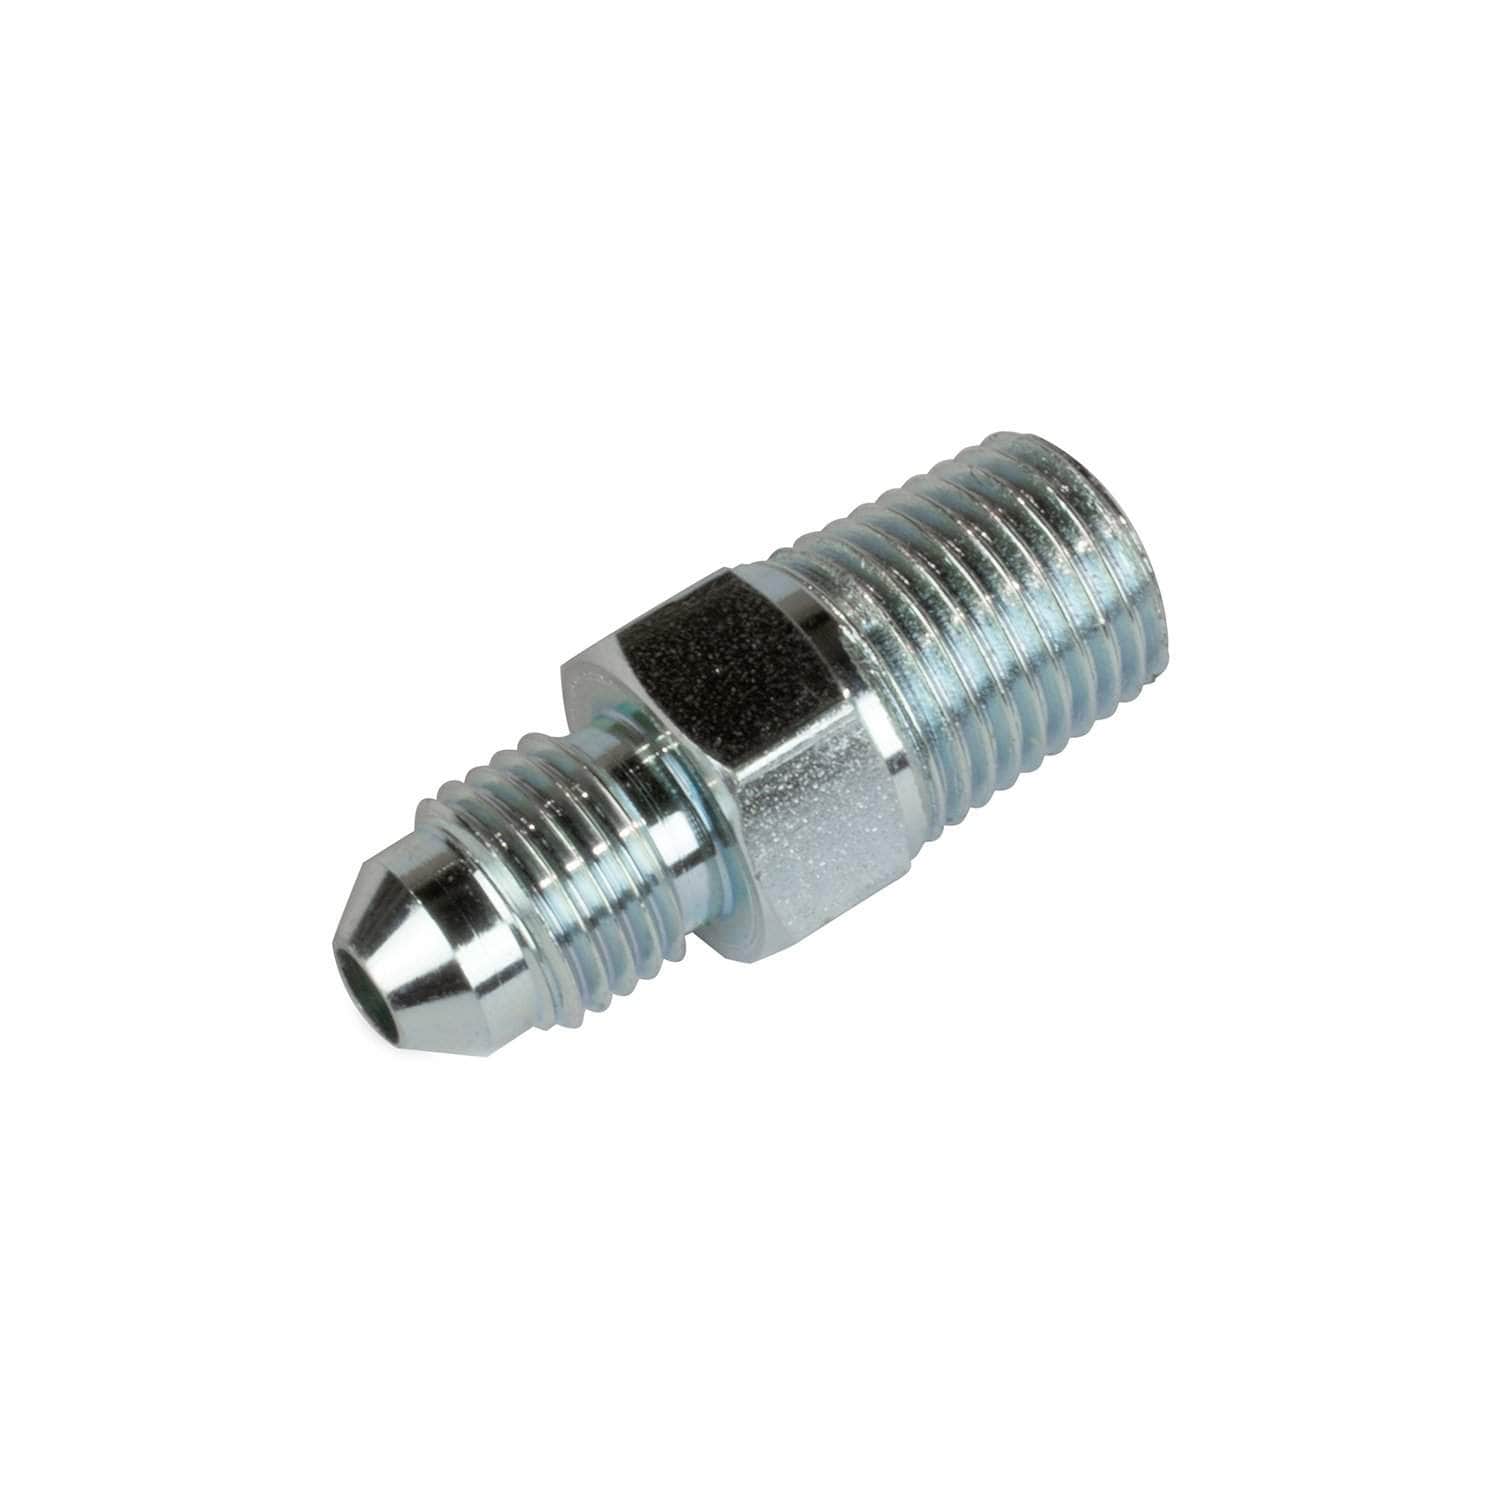 Flared 1/4" x 6mm straight connector for use with oil Aga range cookers with Deep Well burners